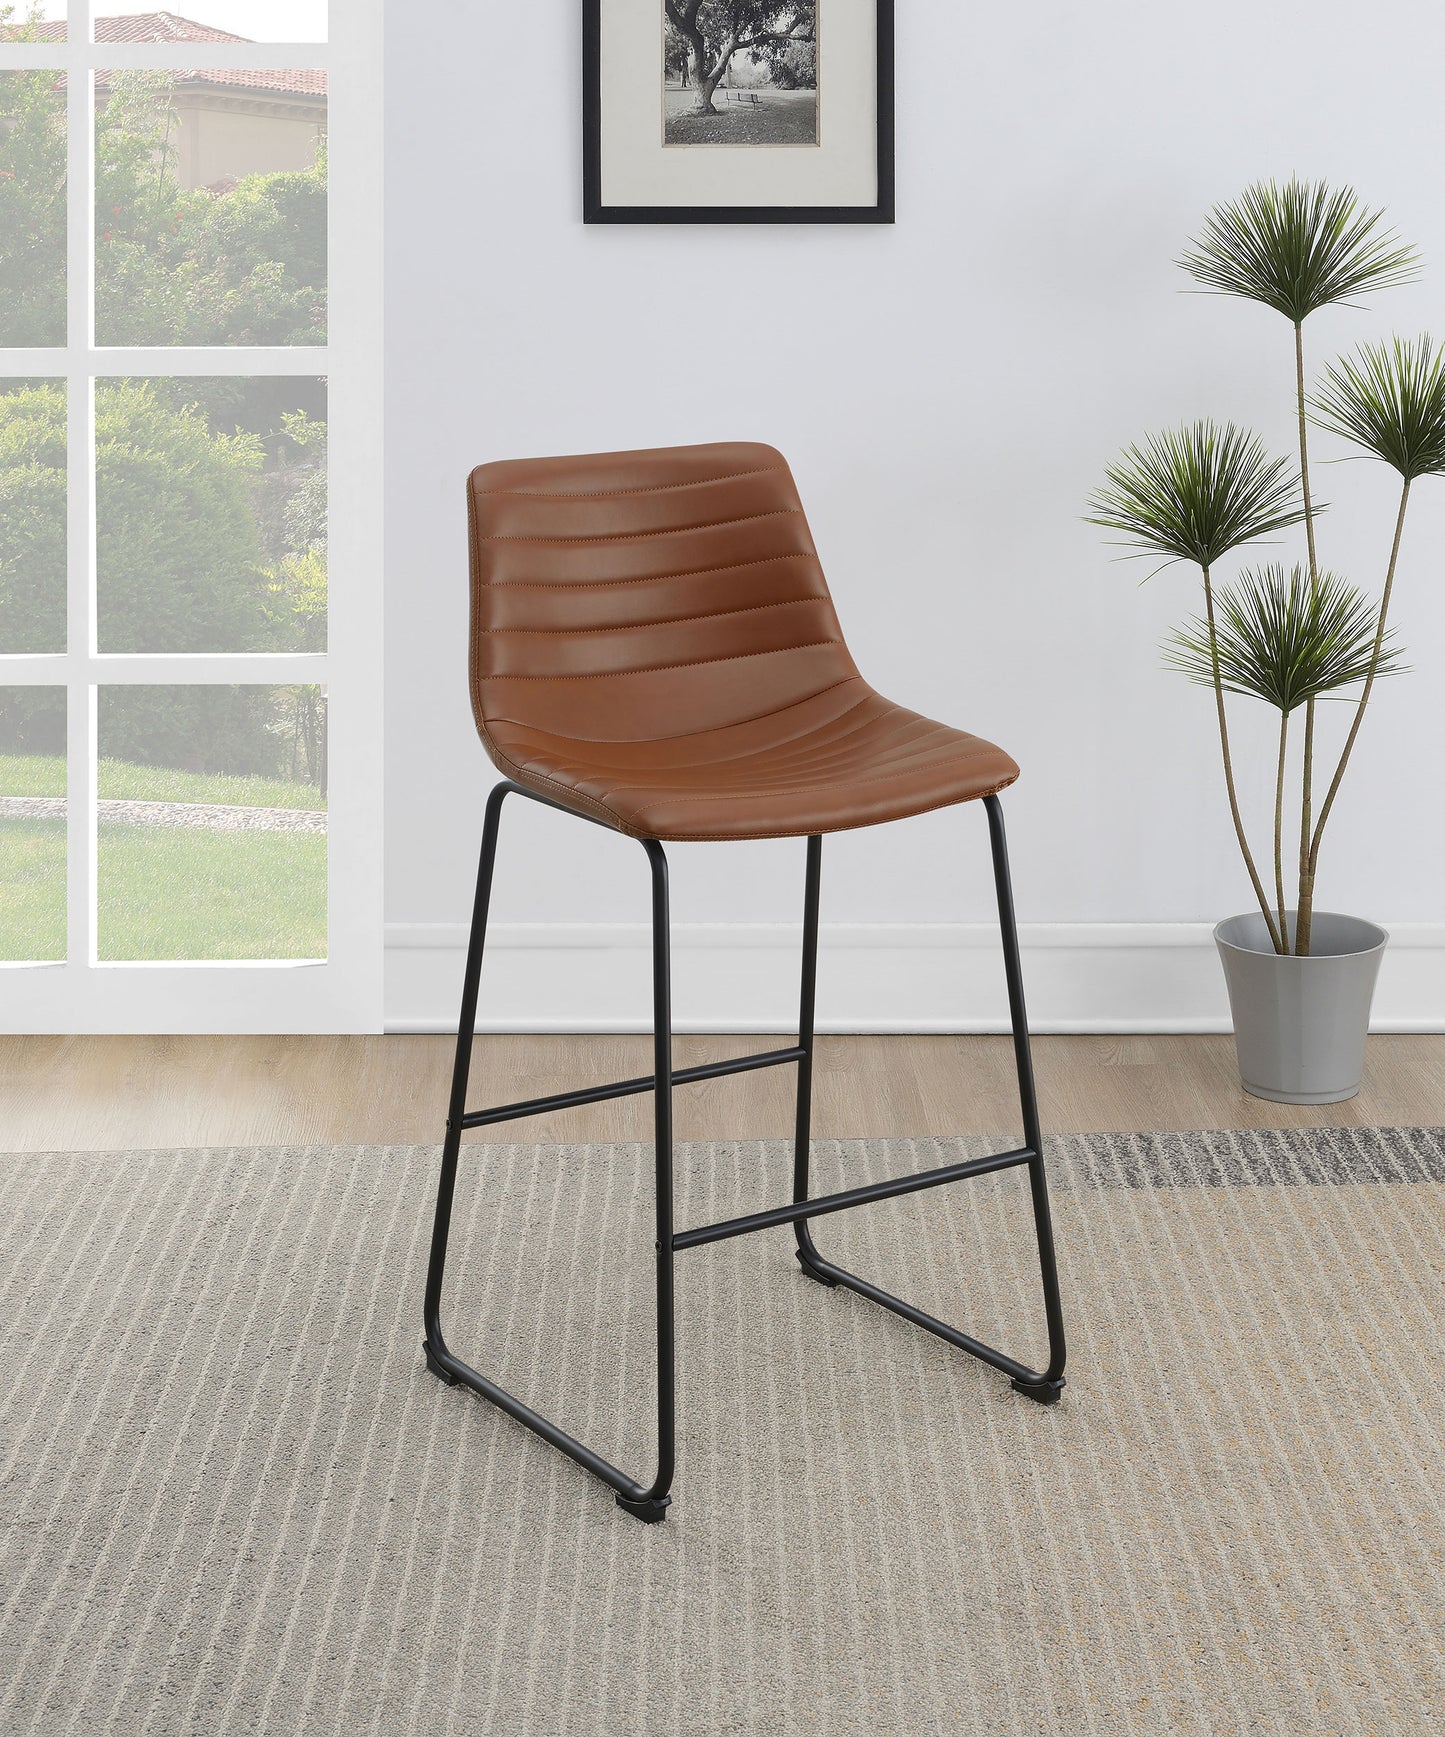 Zuni Upholstered Counter Height Chair Saddle (Set of 2)